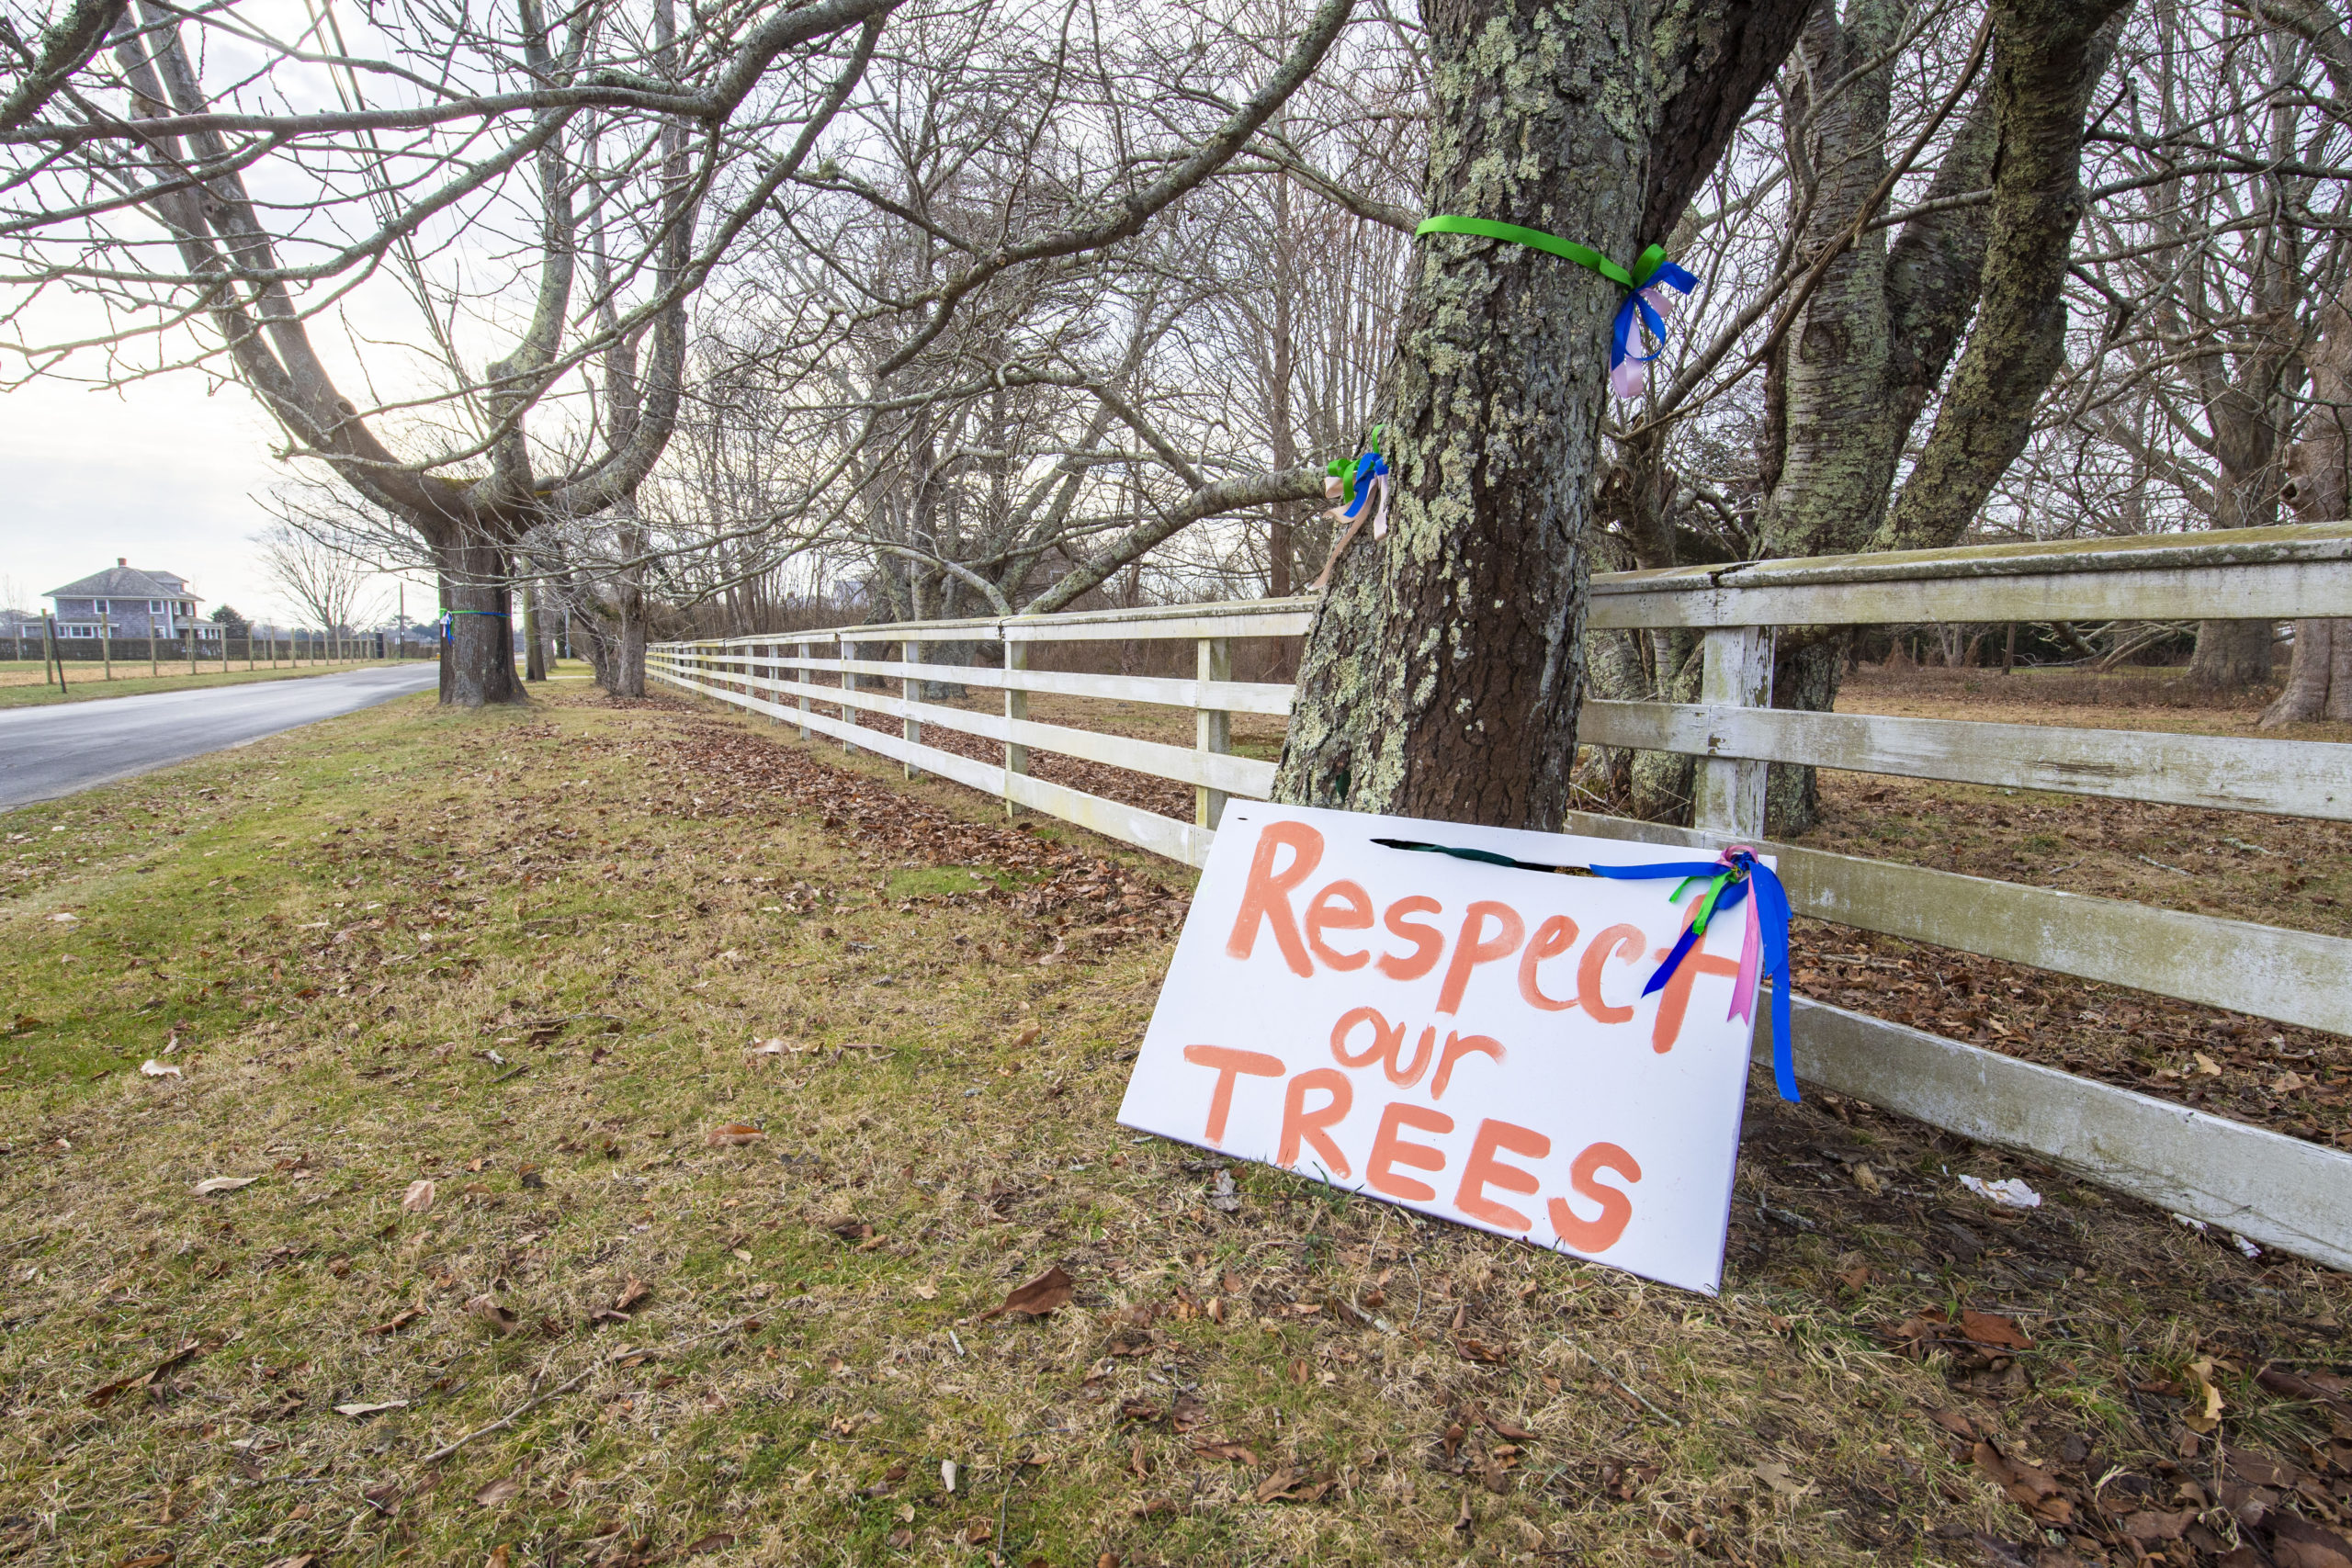 Residents of Wainscott have posted pleadings to South Fork Wind imploring the project's developers to not remove trees along Beach Lane and elsewhere in Wainscott as the two-year installation of the power cable begins.